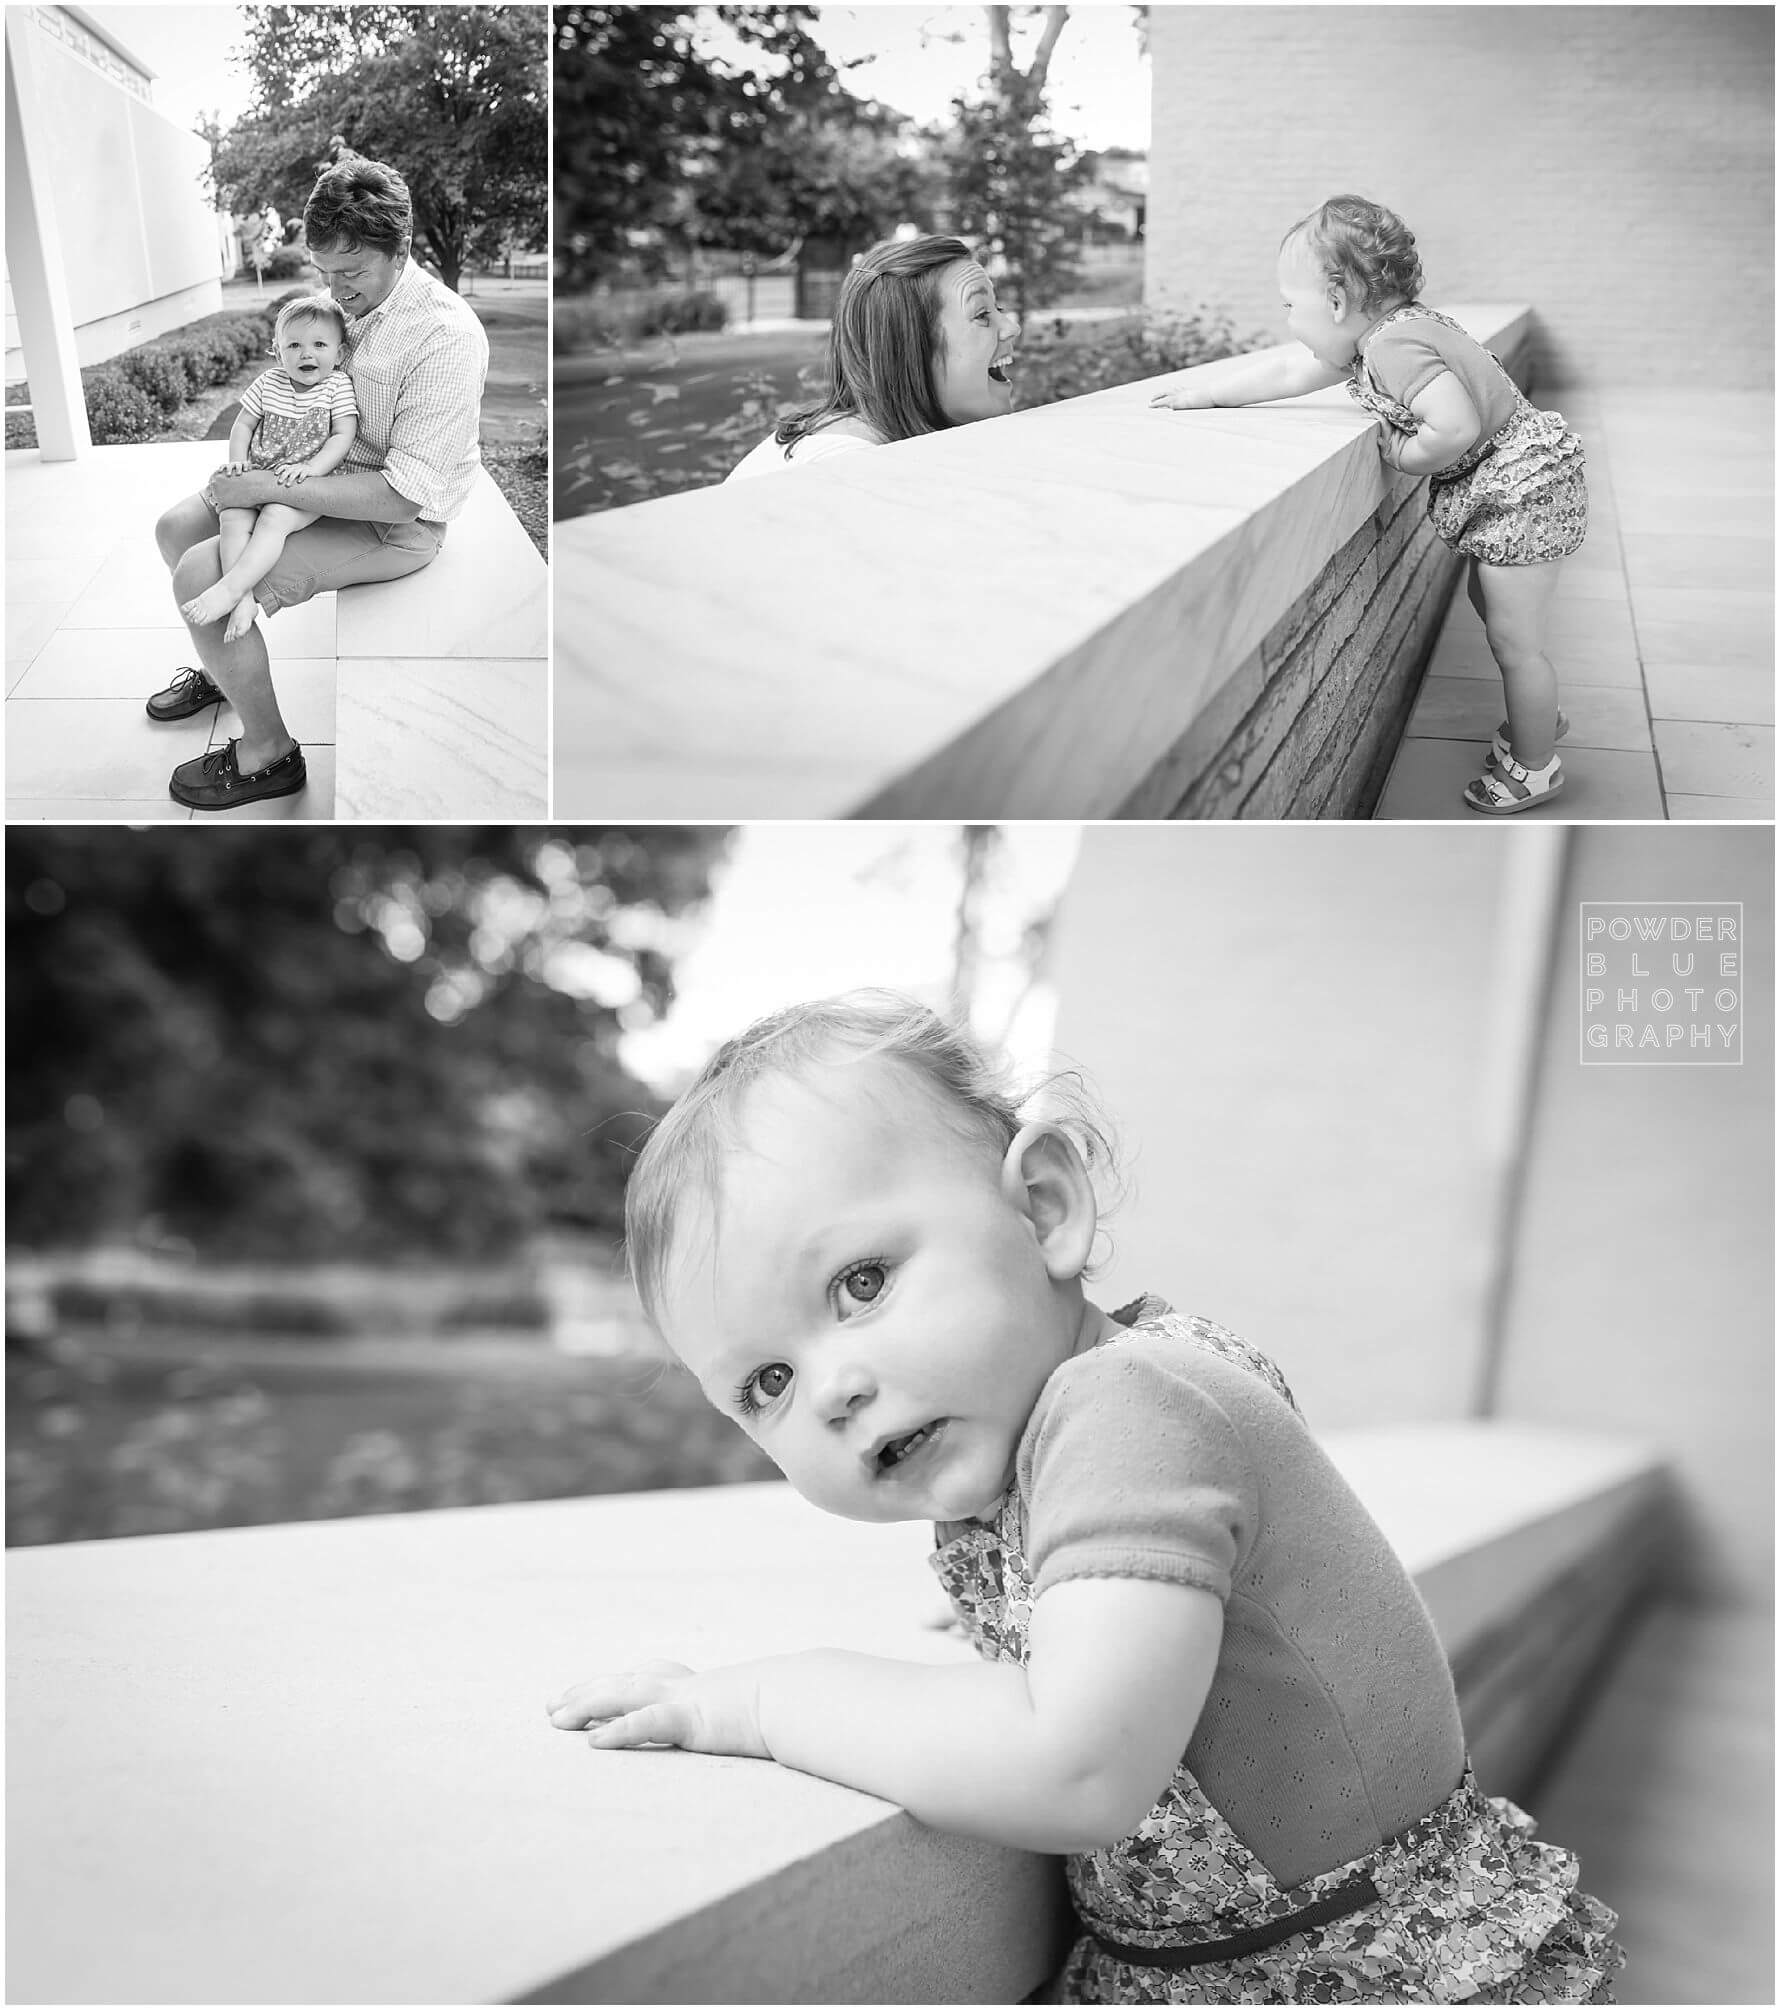 pittsburgh family photography session at frick art and historical center in pittsburgh, pa.  12 month old baby girl and family.